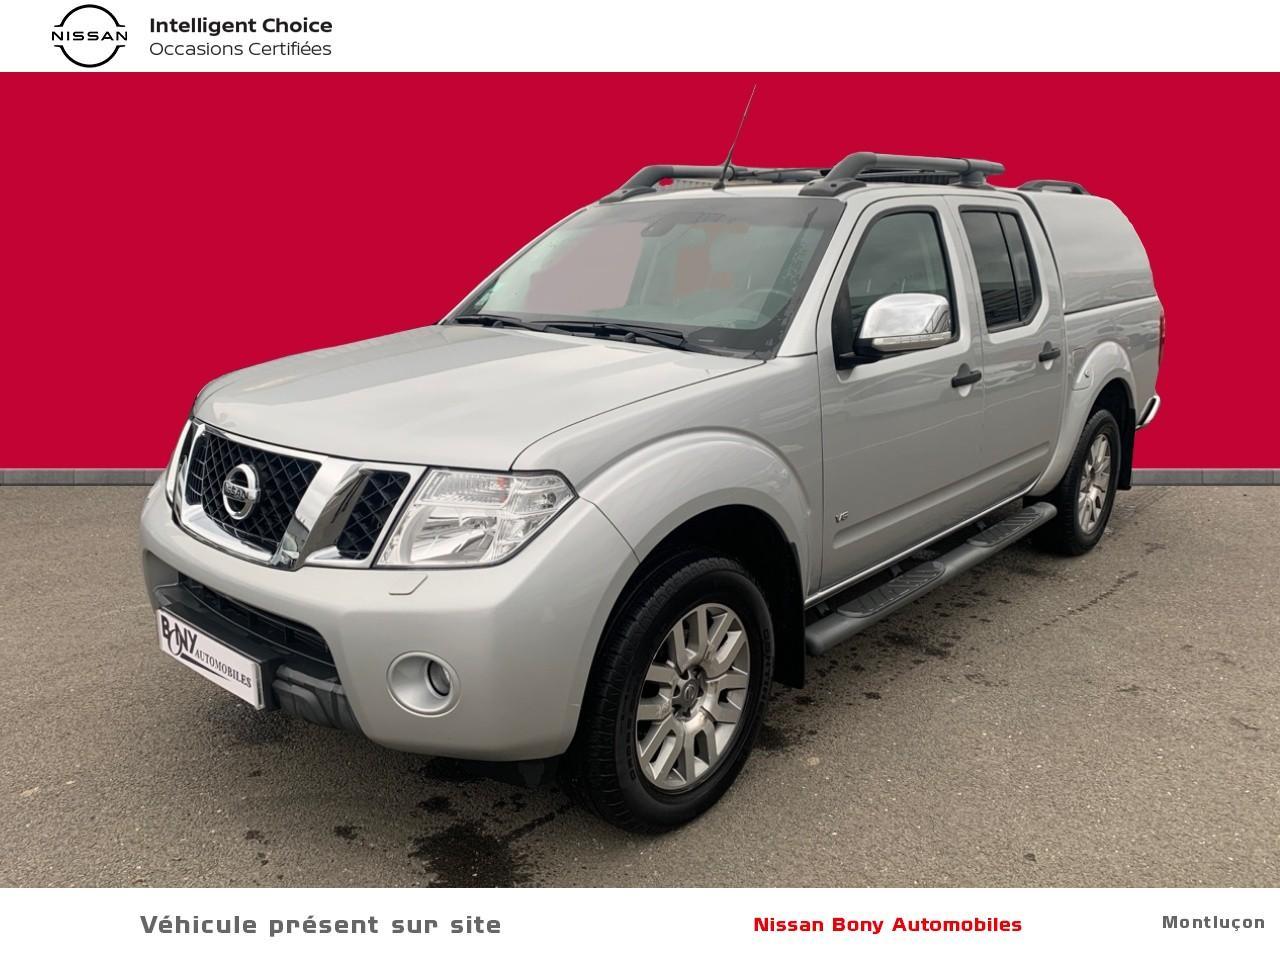 Nissan Navara 3.0 V6 DCI 231 DOUBLE CAB ULTIMATE EDITION A